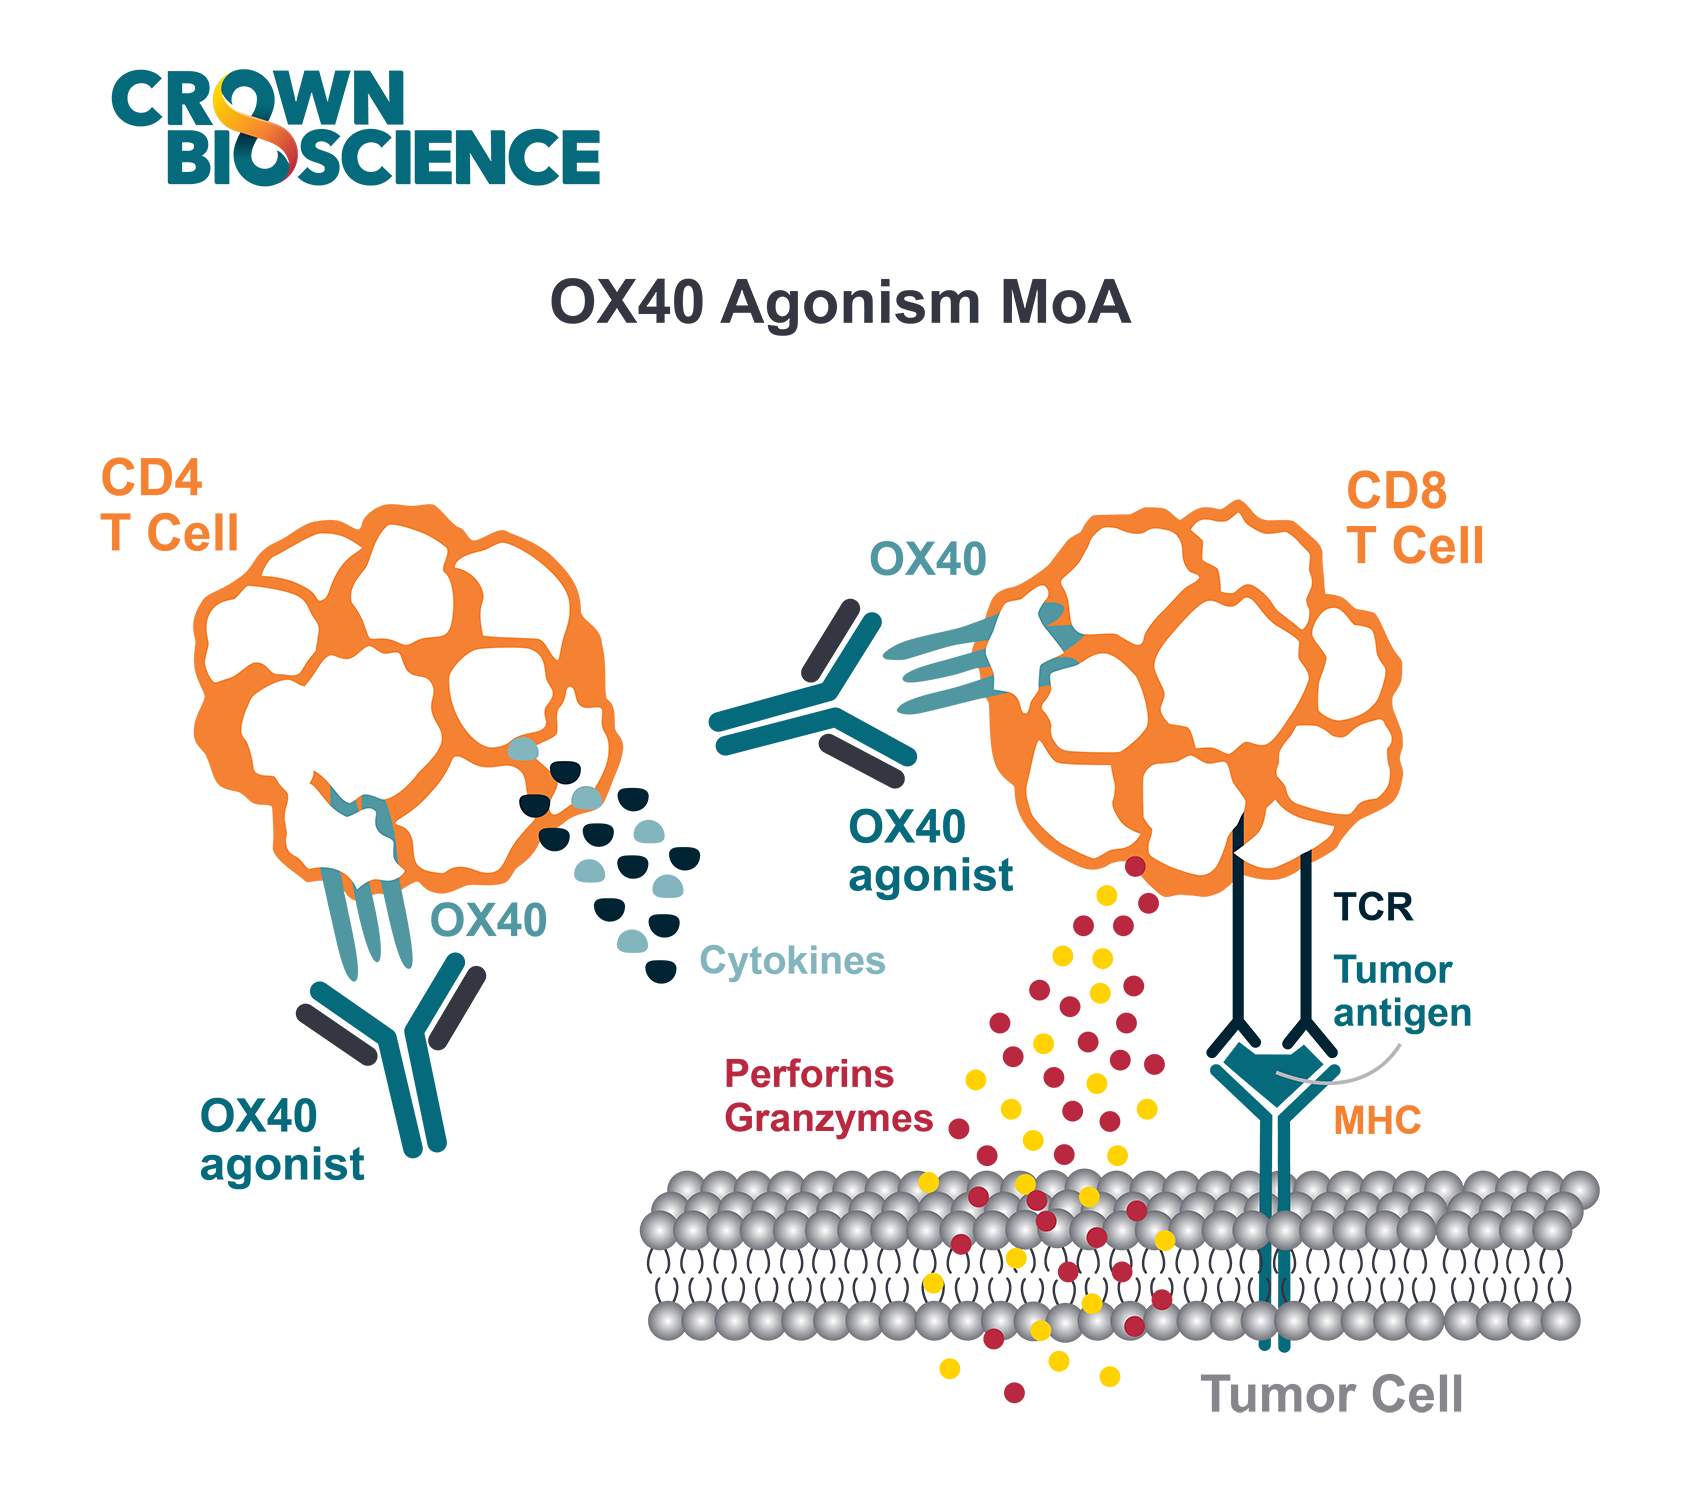 OX40 Agonists: Boosting Cancer Immunotherapy